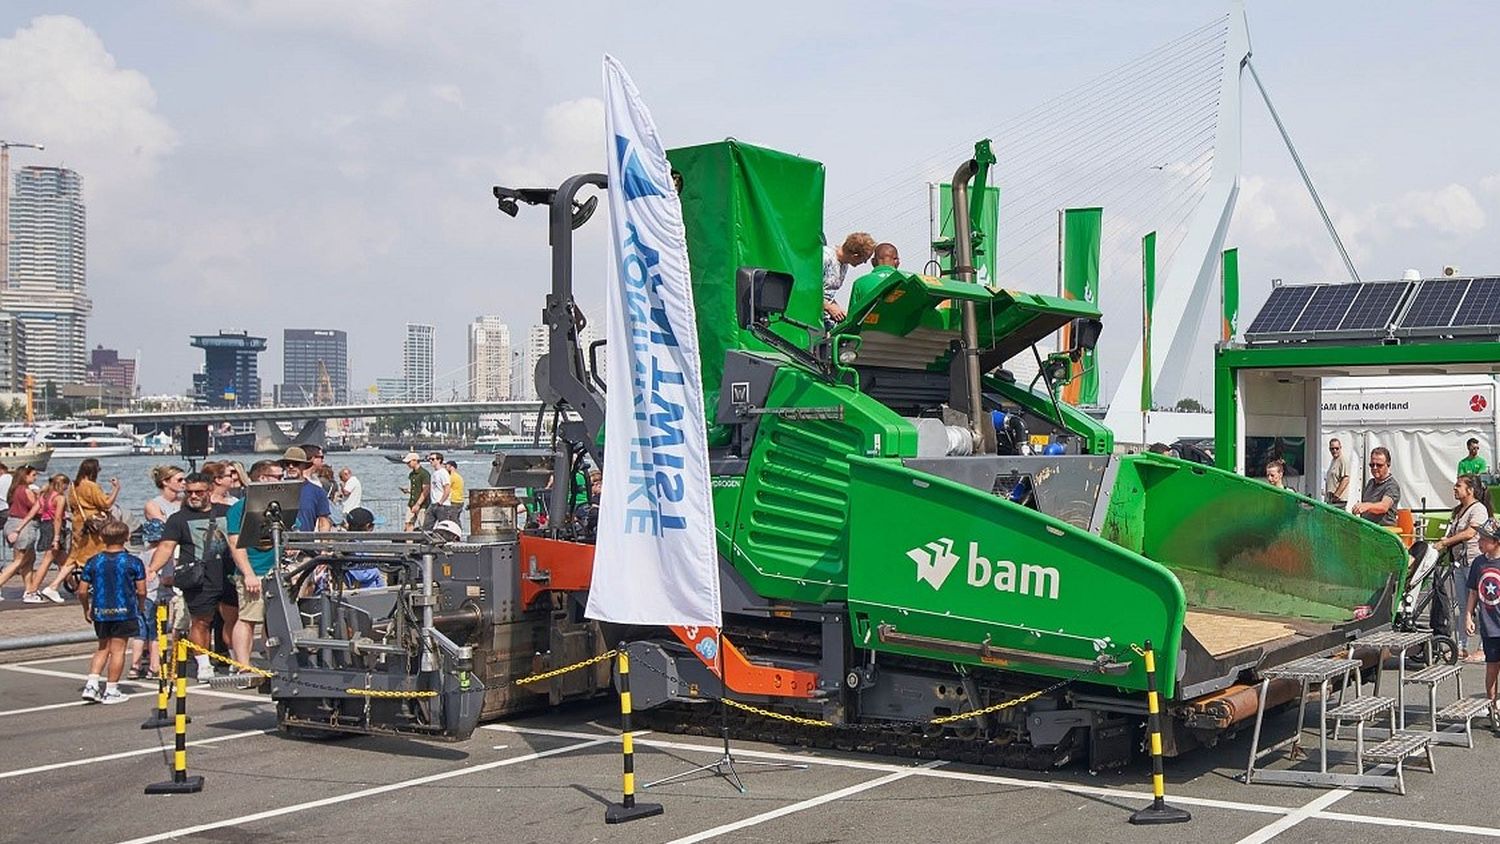 Bam launched its hydrogen paving machine on 5 September in Gouda (Courtesy of Bam Infra Nederland)